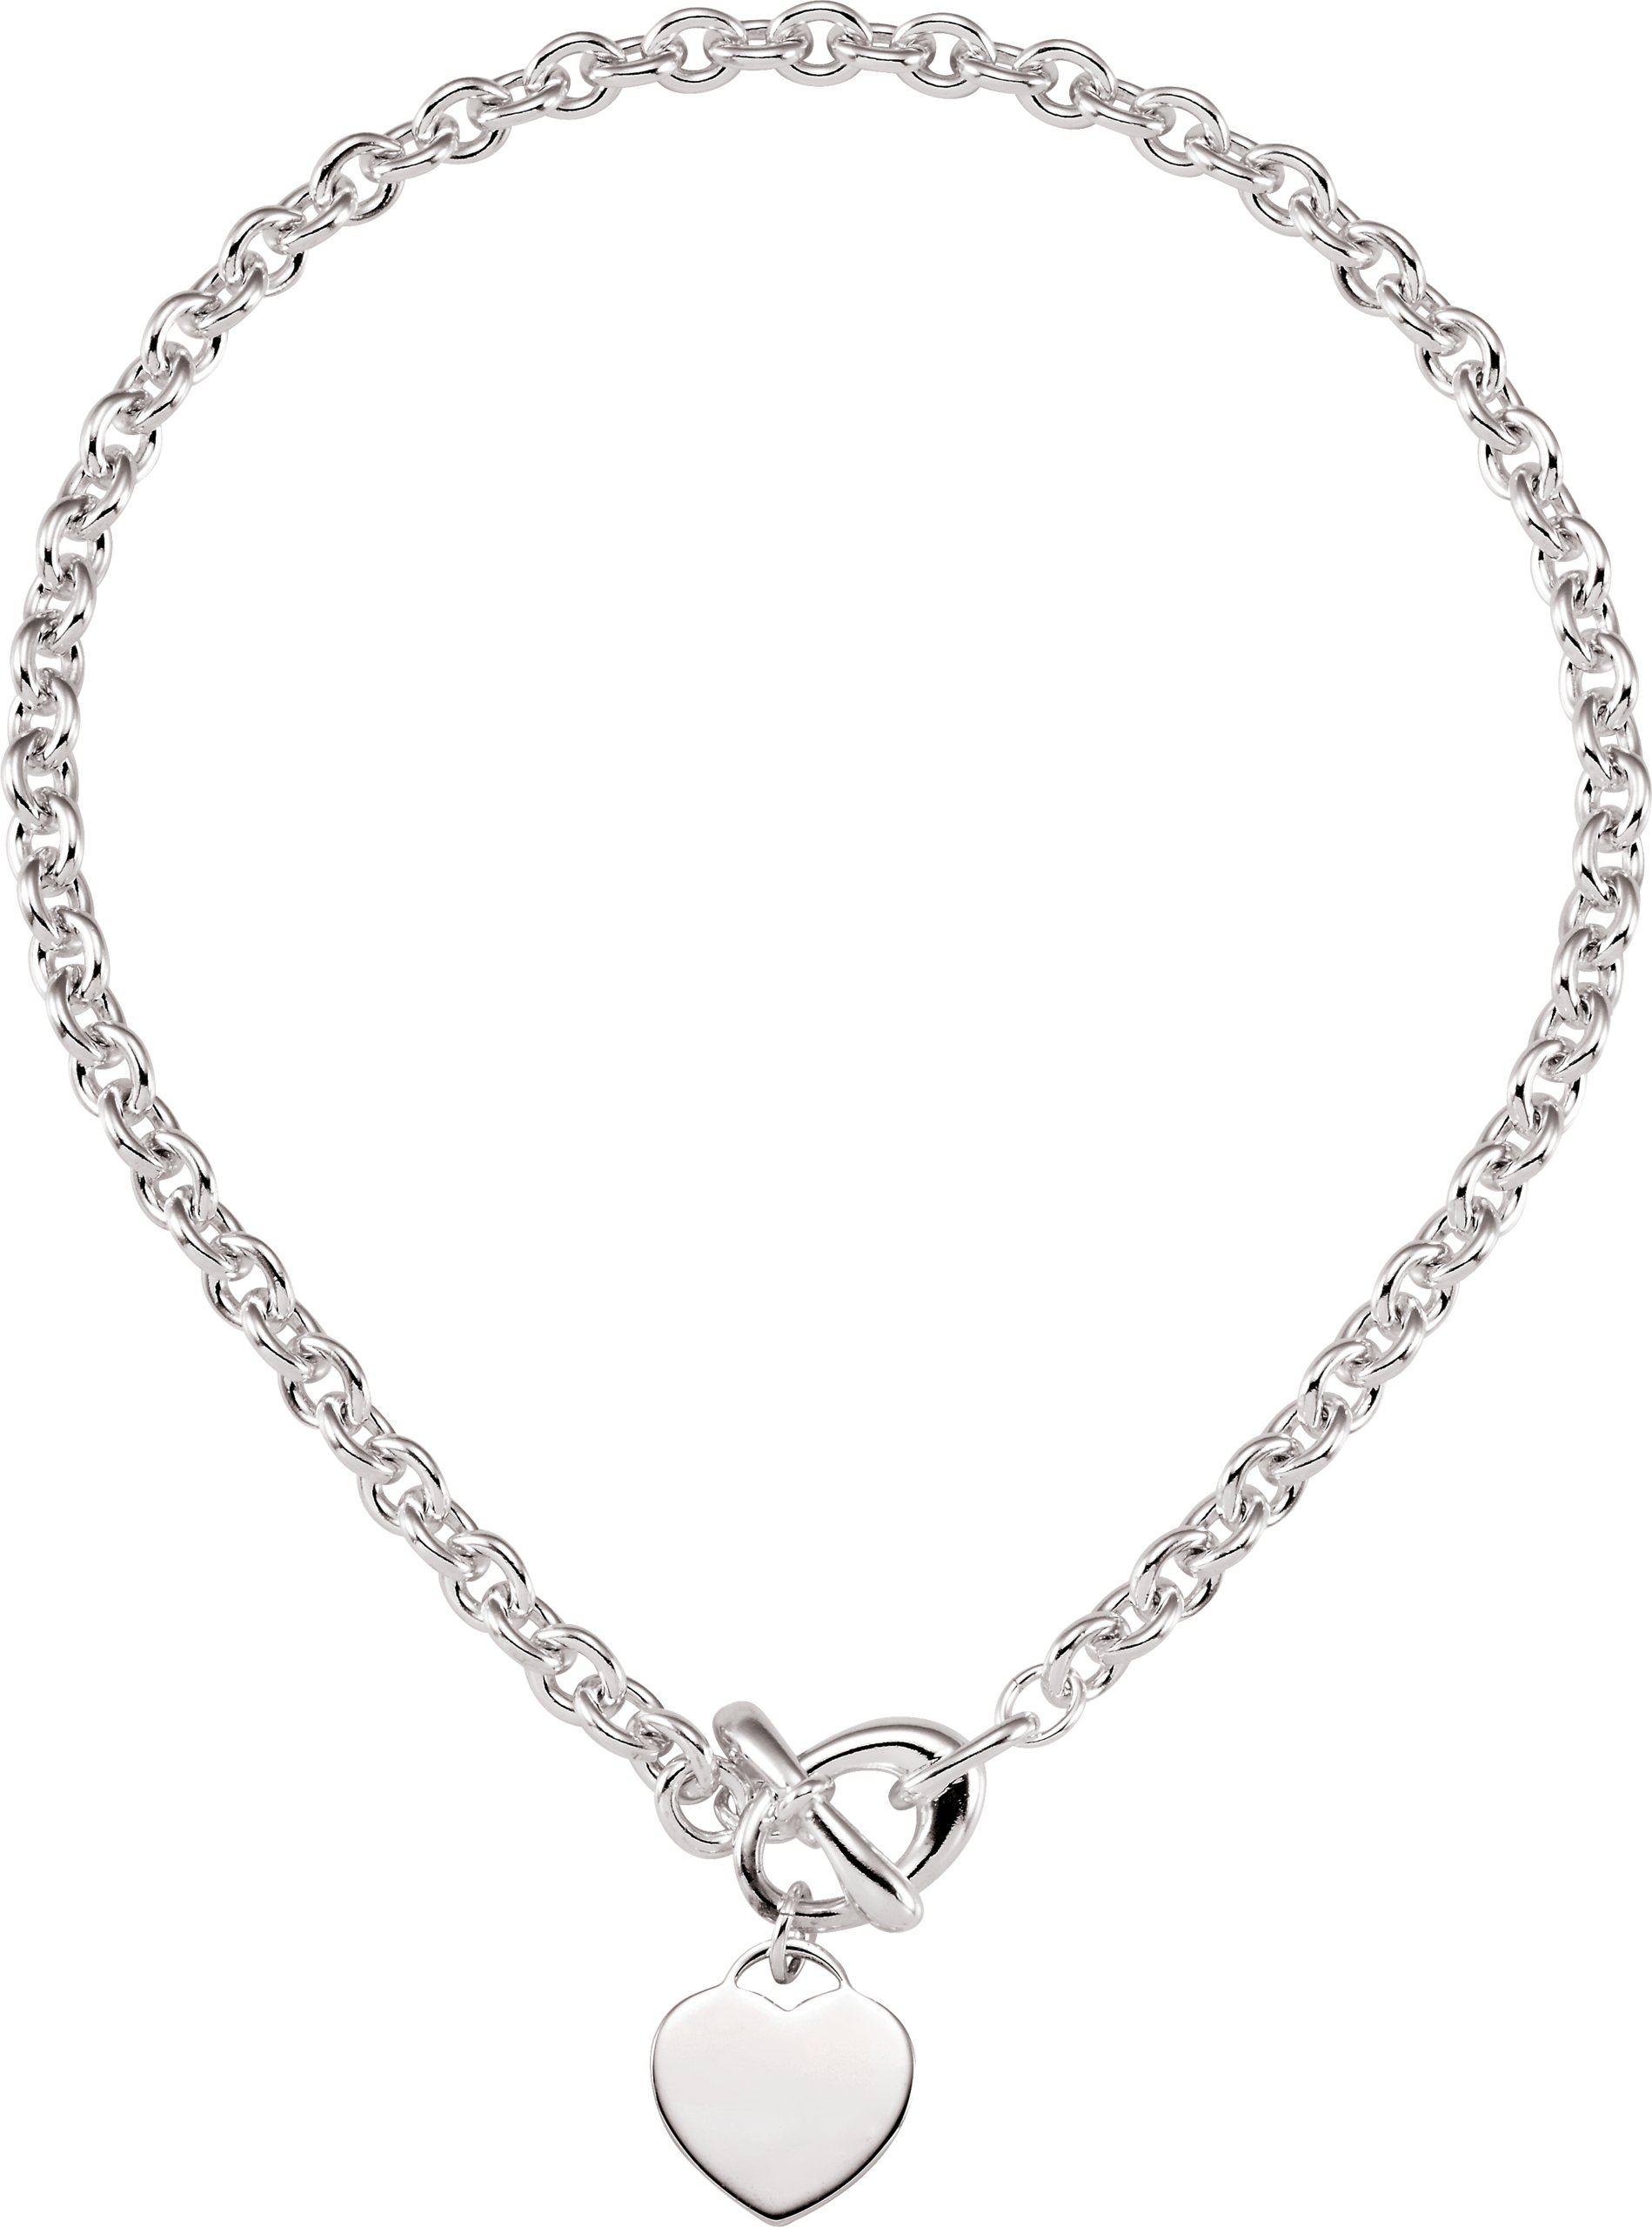 Sterling Silver 8 mm Cable 18" Chain with Heart Charm & Toggle Clasp